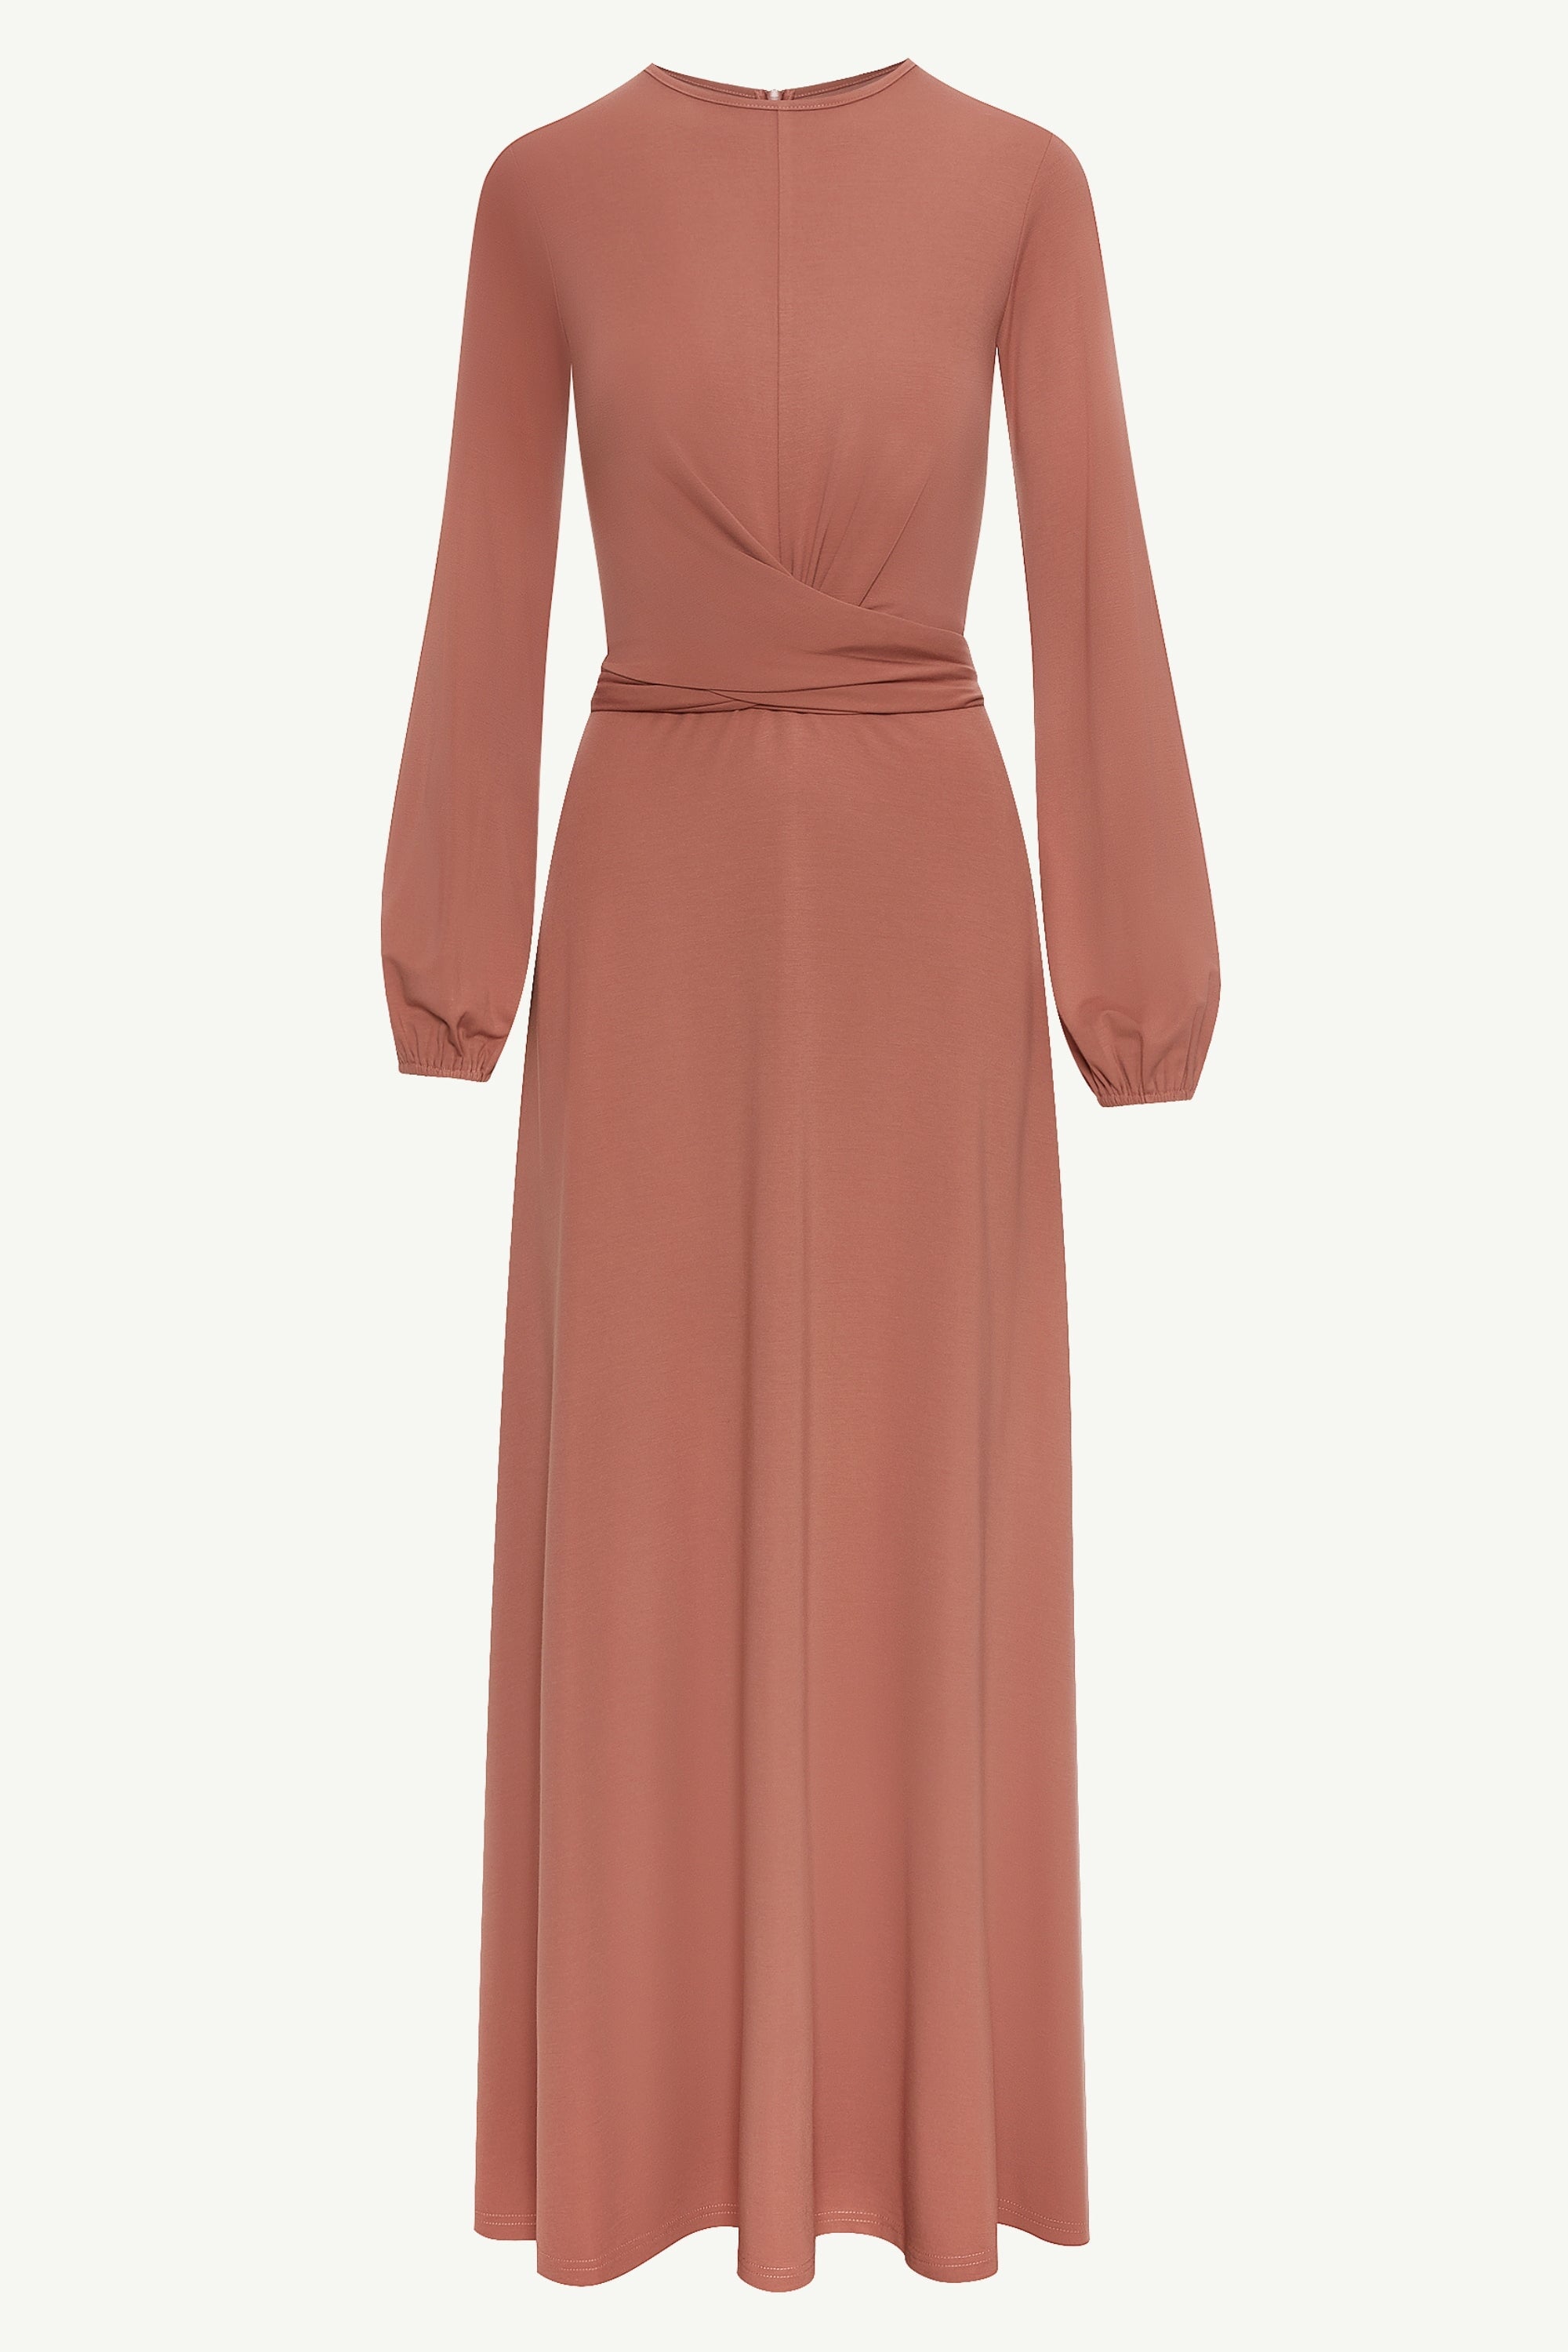 Veiled | Modest Maxi Dresses for Women – Page 3